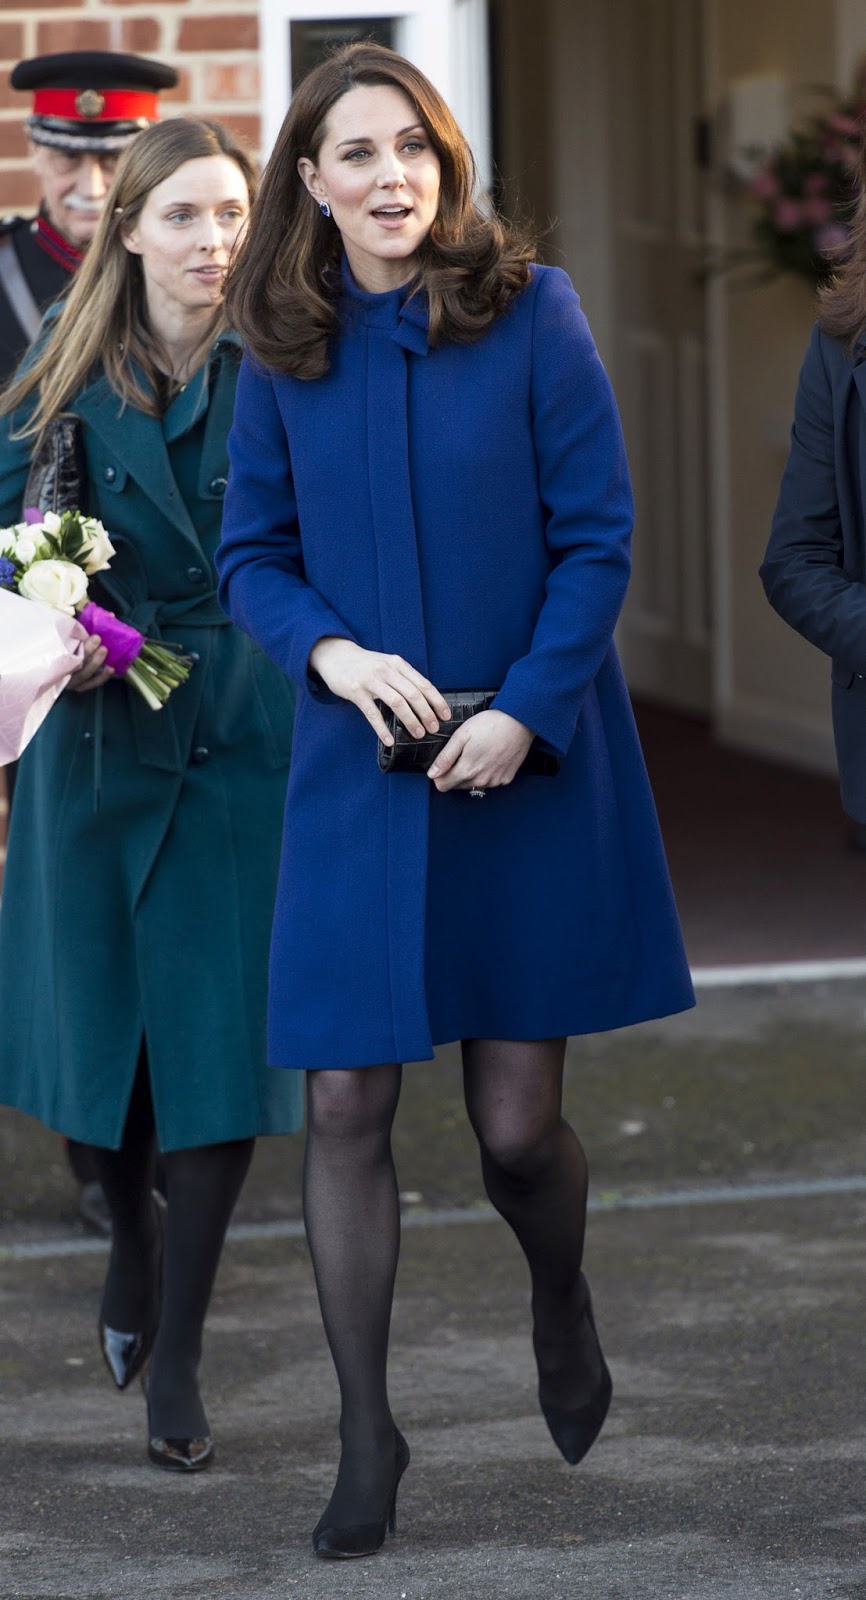 Celebrity Legs and Feet in Tights: Kate Middleton`s Legs and Feet in ...